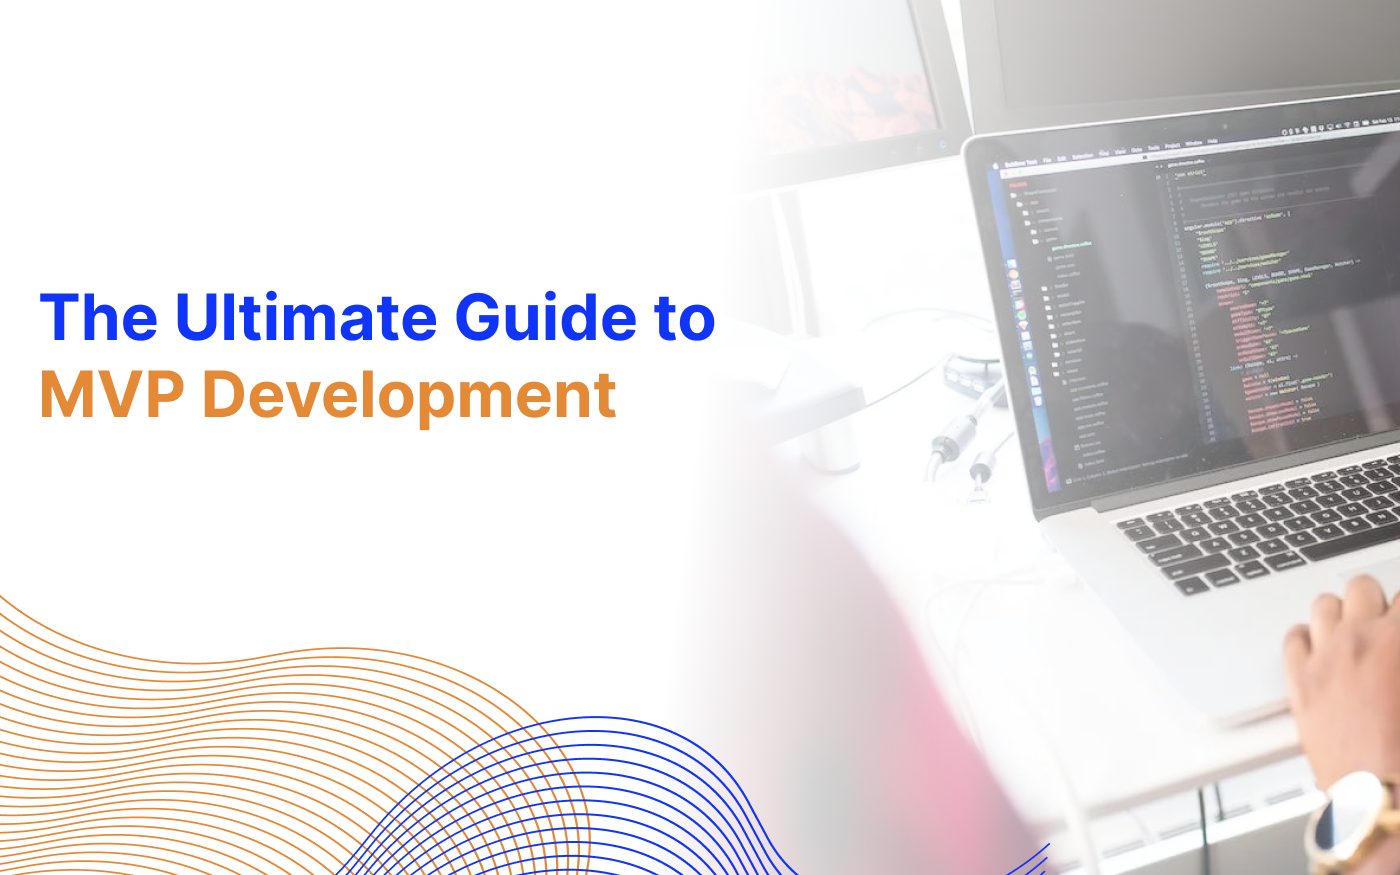 The Ultimate Guide to MVP Development